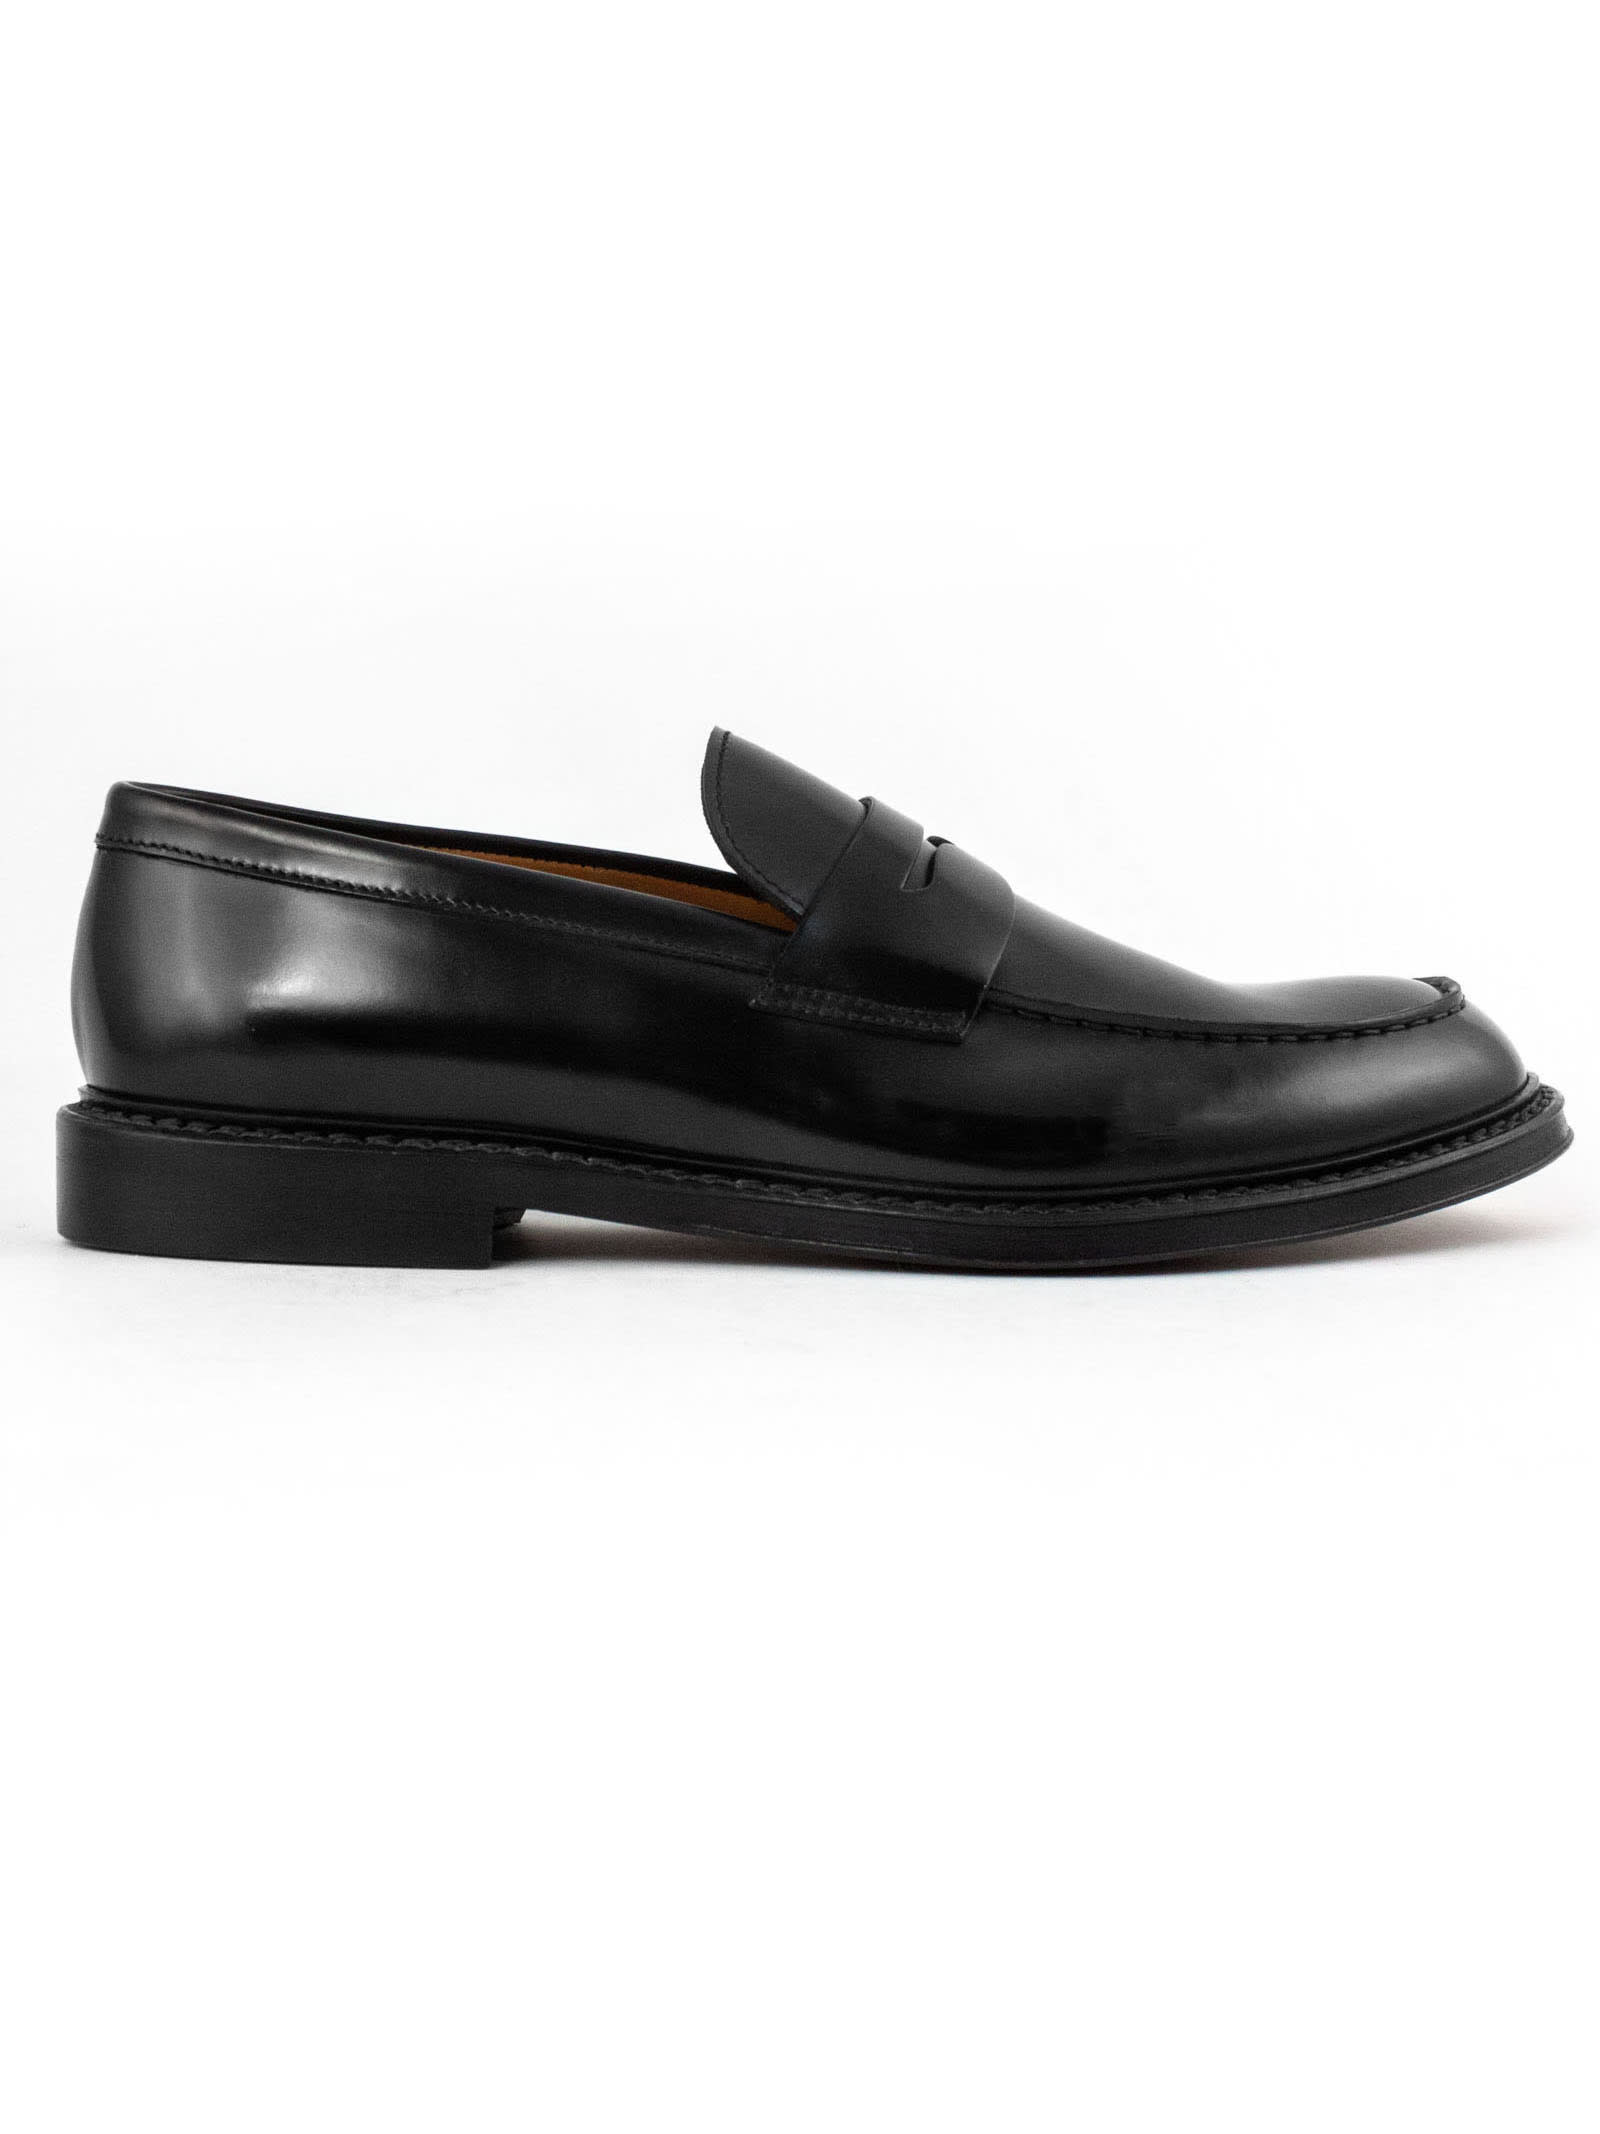 Doucals Black Leather Penny Loafer